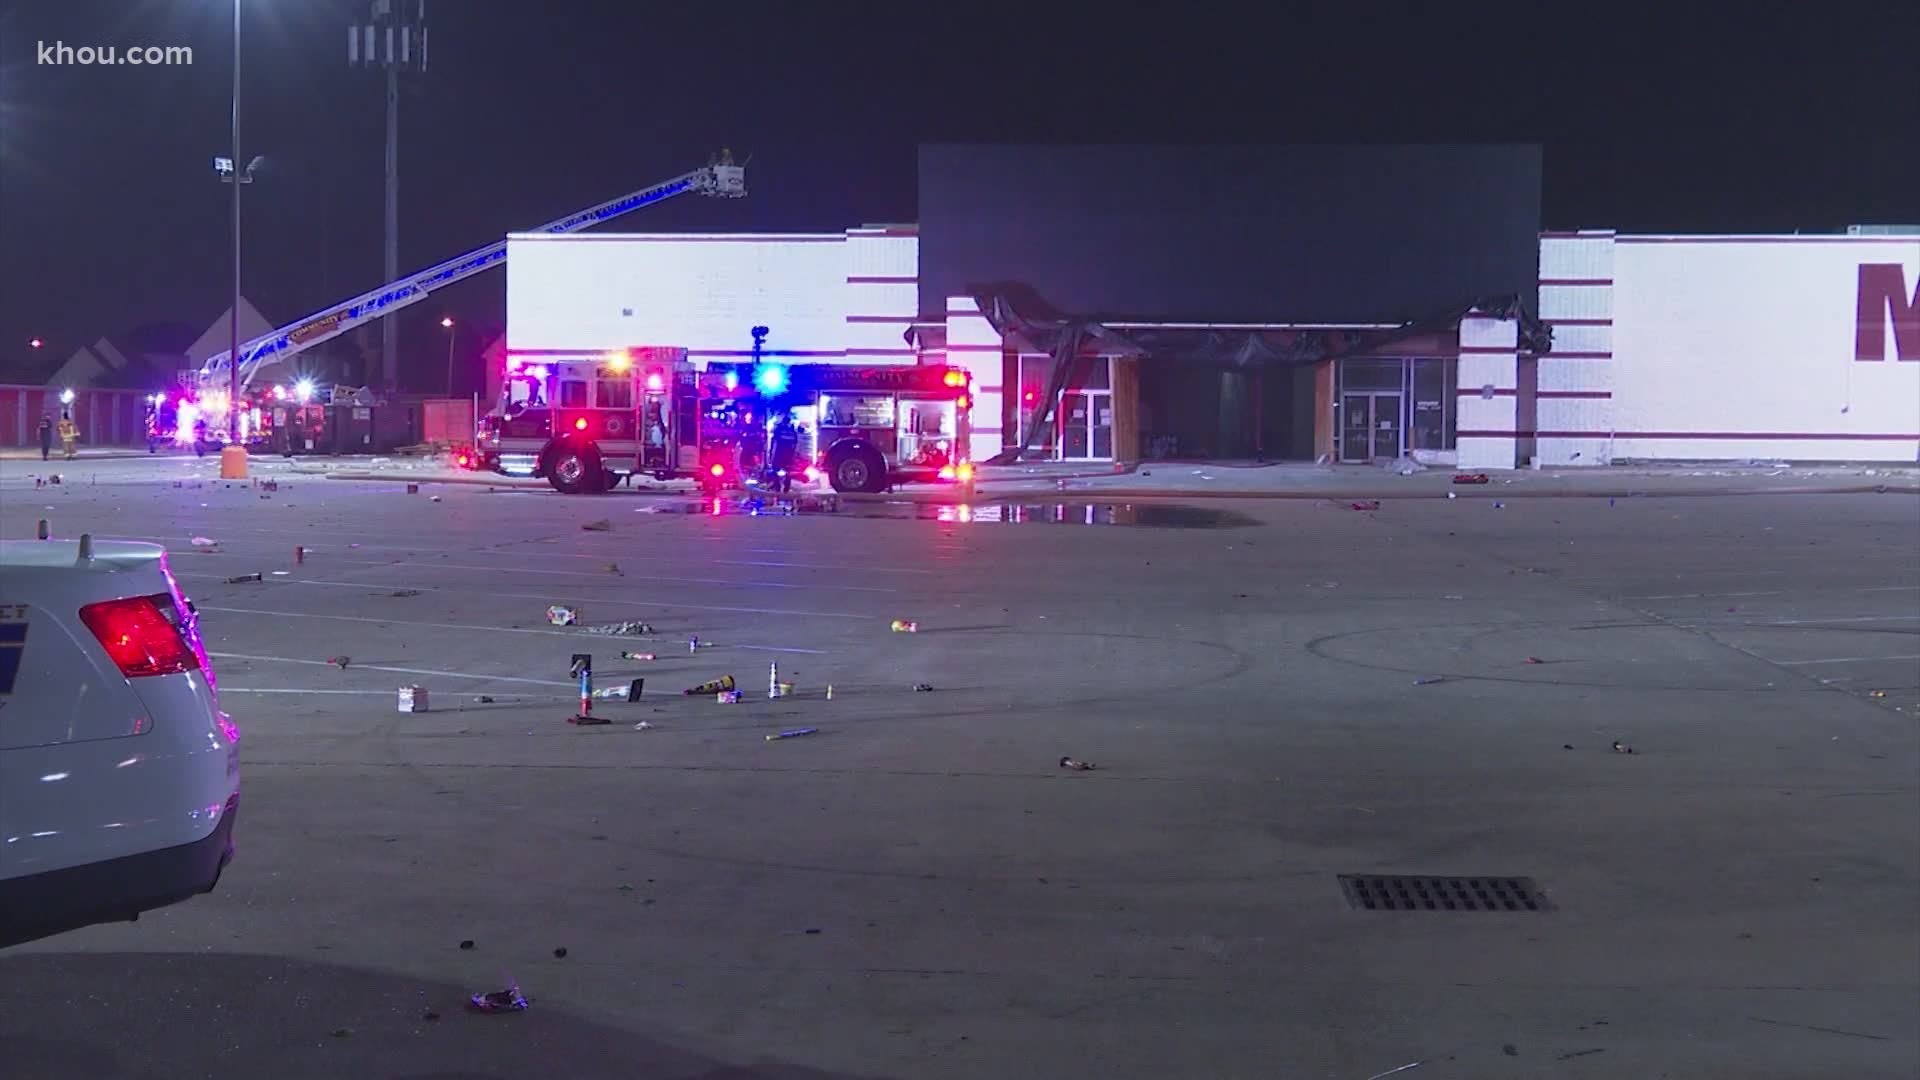 The Harris County Fire Marshal's Office is investigating the cause of a fire that happened at a building under construction near the Mission Bend area on July 4th.